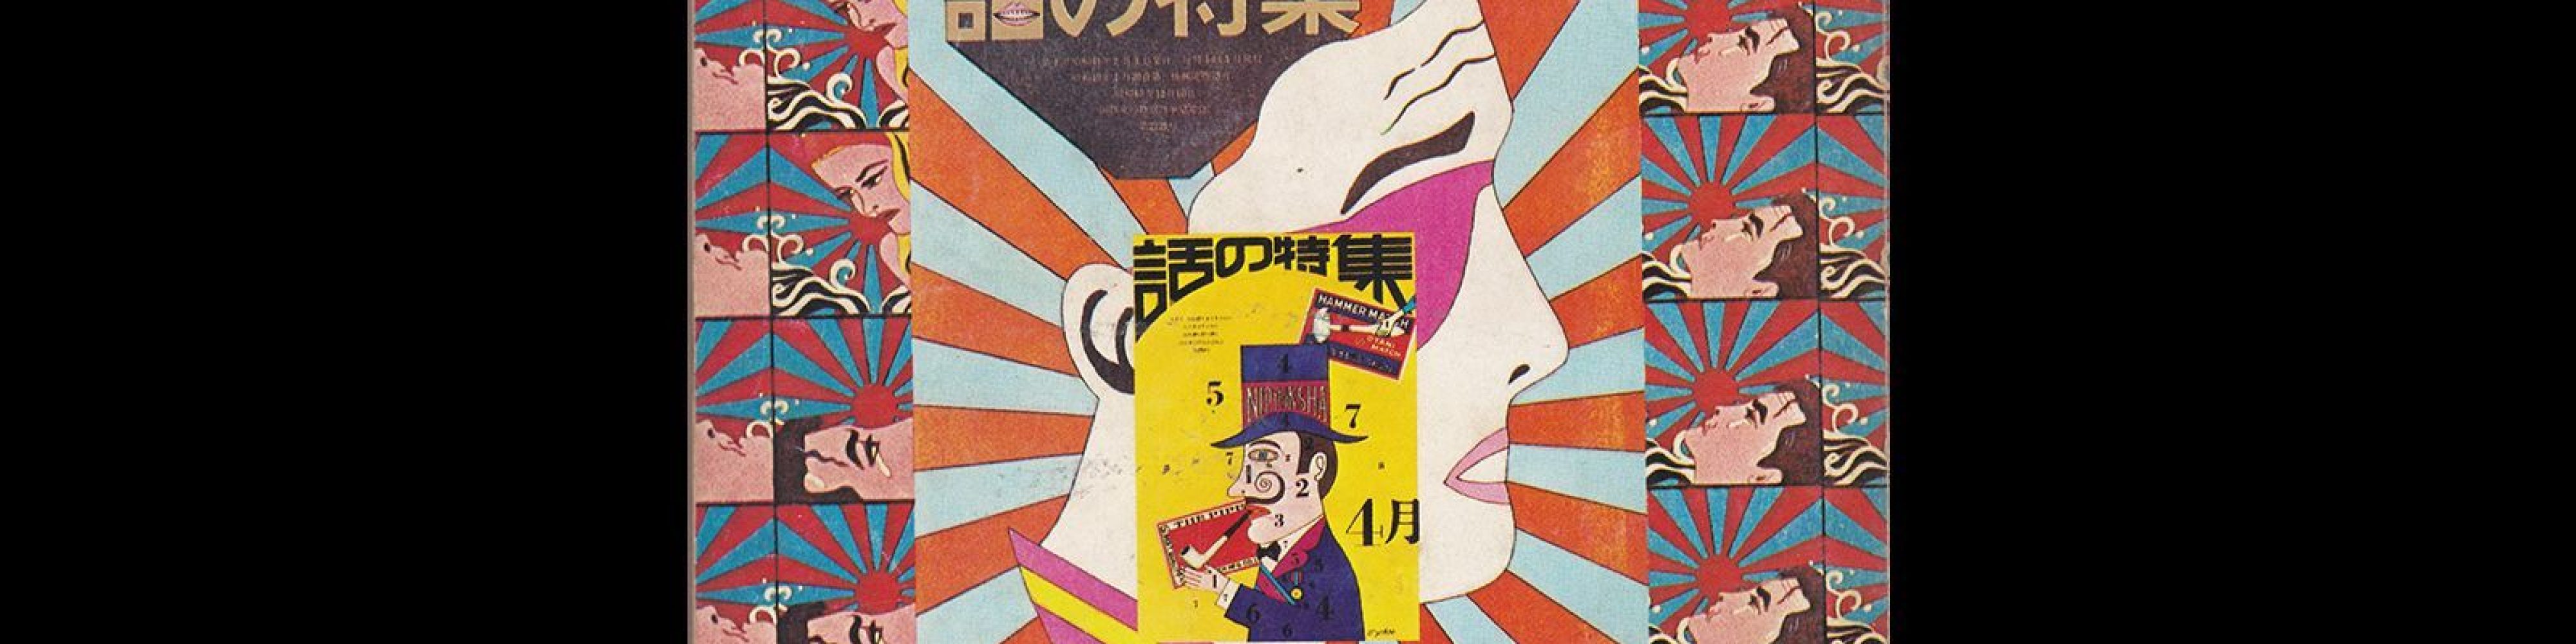 Special issue of story 100th anniversary special edition, 1974. Cover design by Tadanori Yokoo